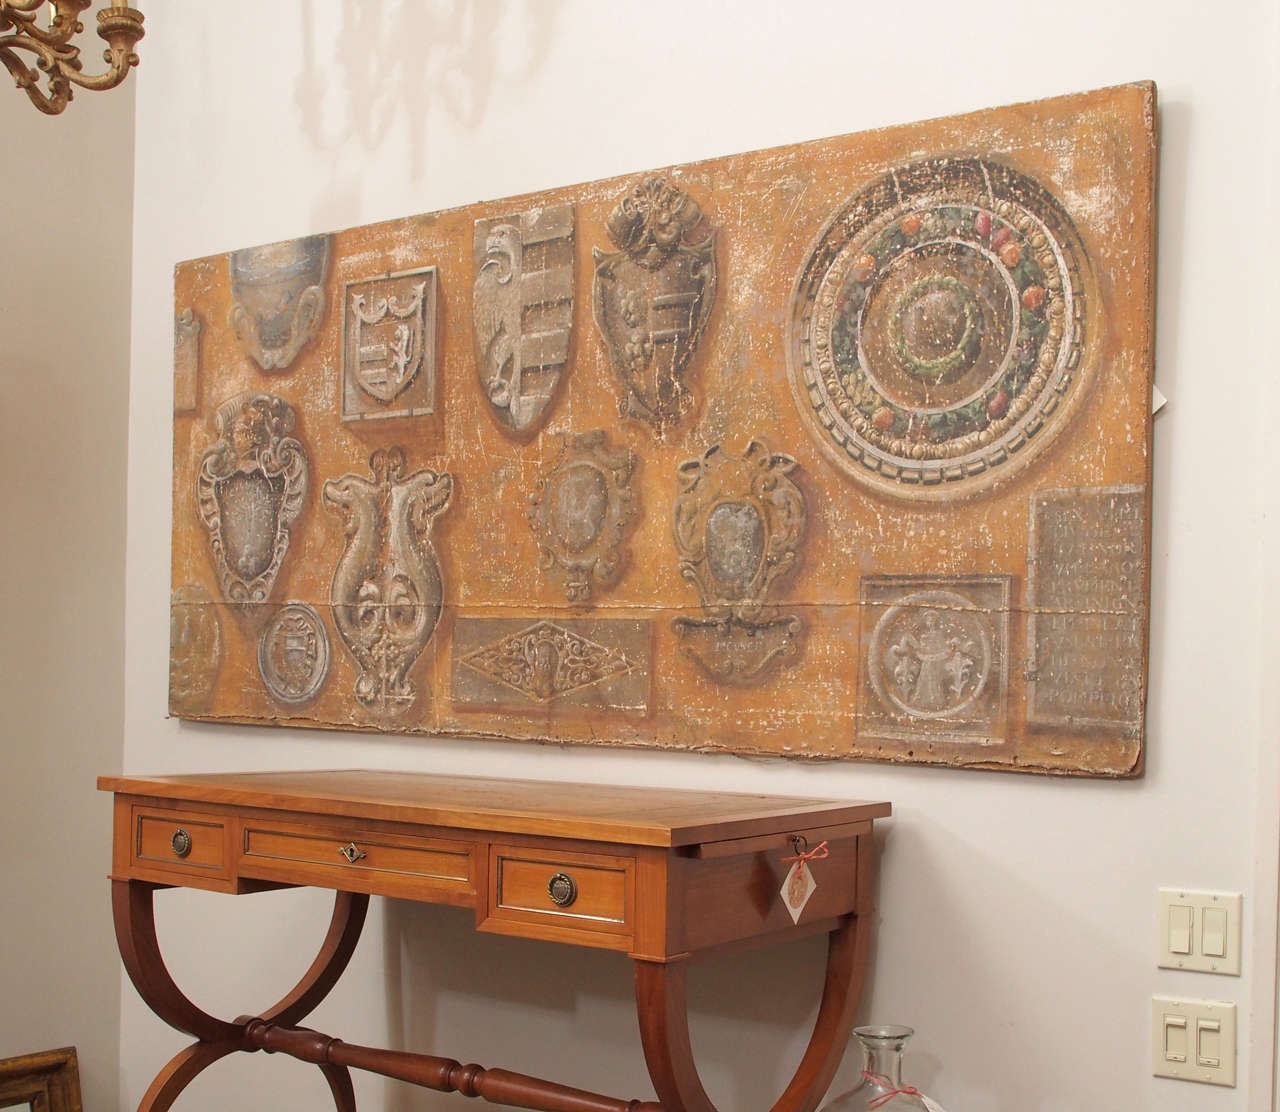 A large oil on canvas painting of architectural fragments, including shields and coats of arms, the fragments presented as if mounted on a painted plaster wall.  The canvas is of a coarse linen, with hand forged iron nails securing it to a highly